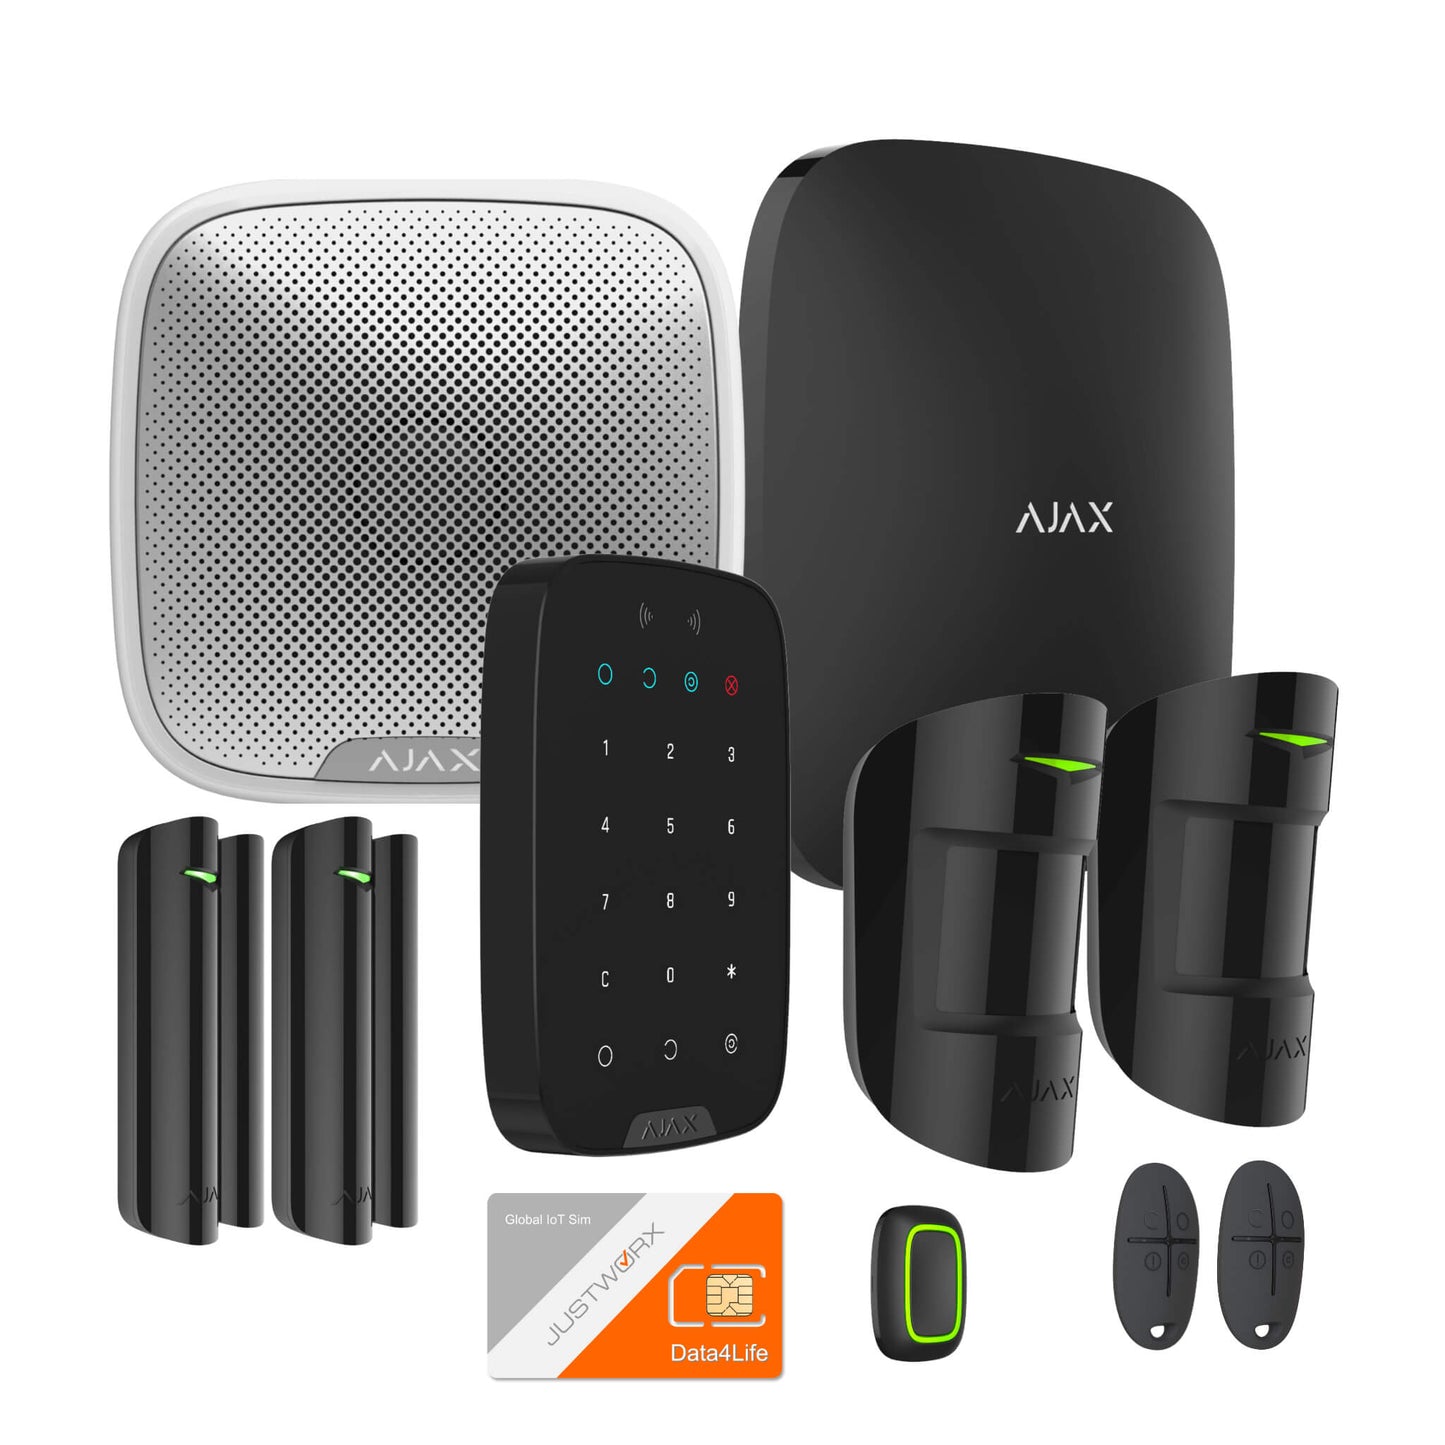 Ajax Business StarterKit - a wireless all in one business security solution which includes all the devices you need to get started. Ships at 1.25 kgs.